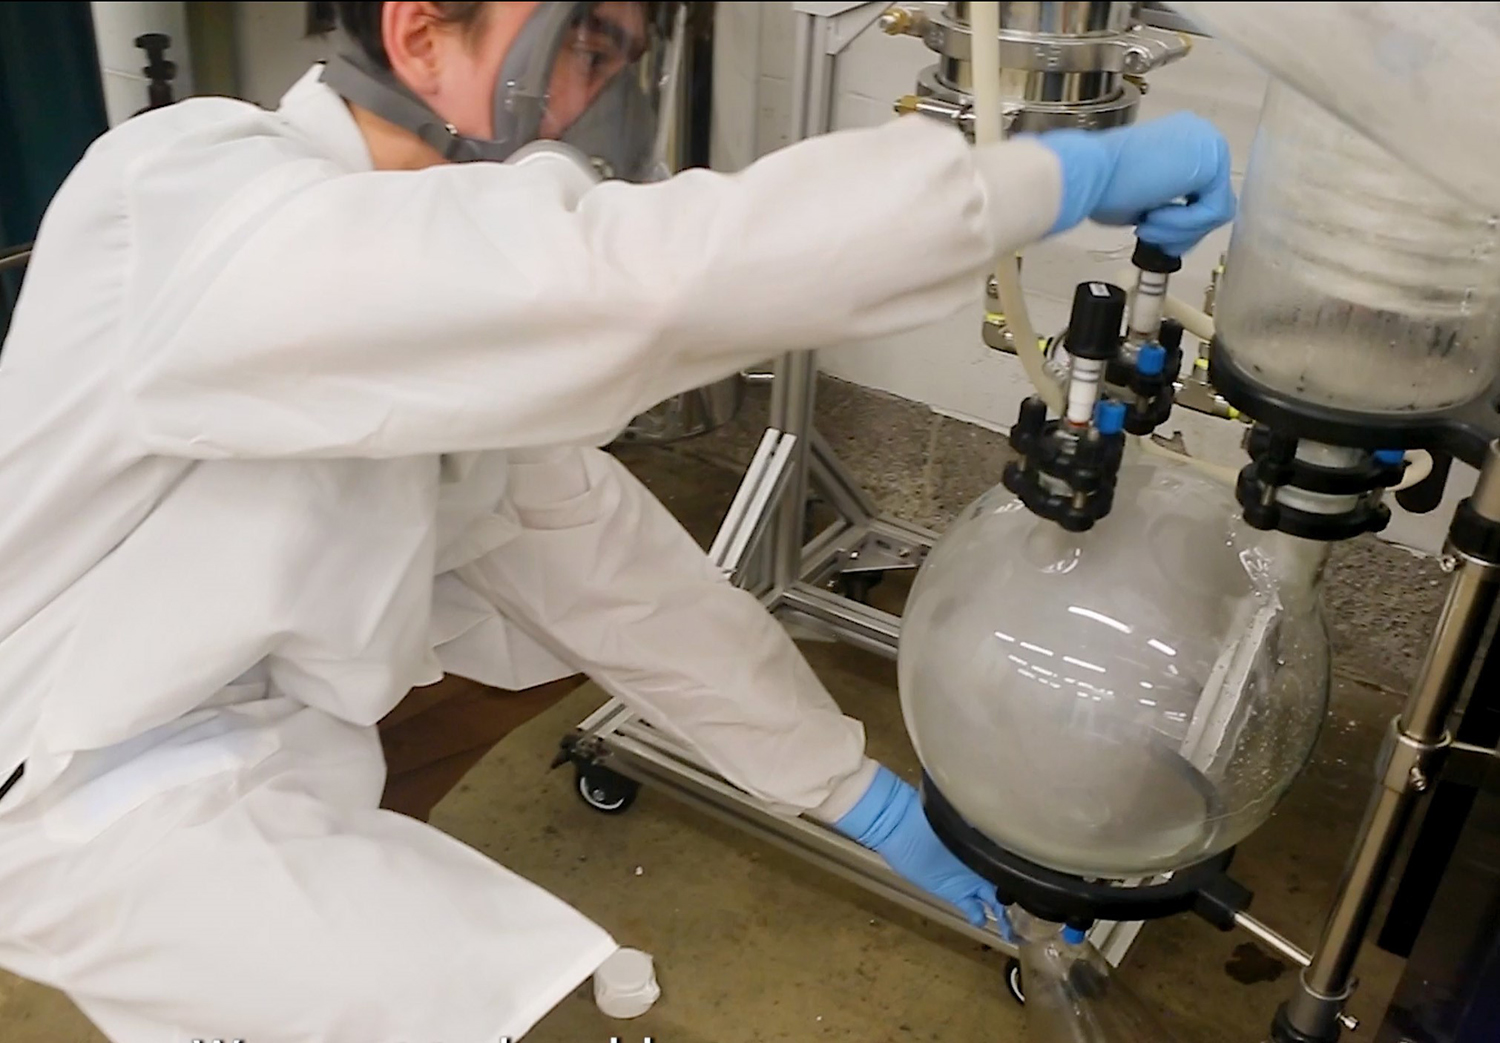 A Claros scientist de-stills PFAS waste to a highly concentrated solution, making it more cost-effective and efficient to destroy in high quantities